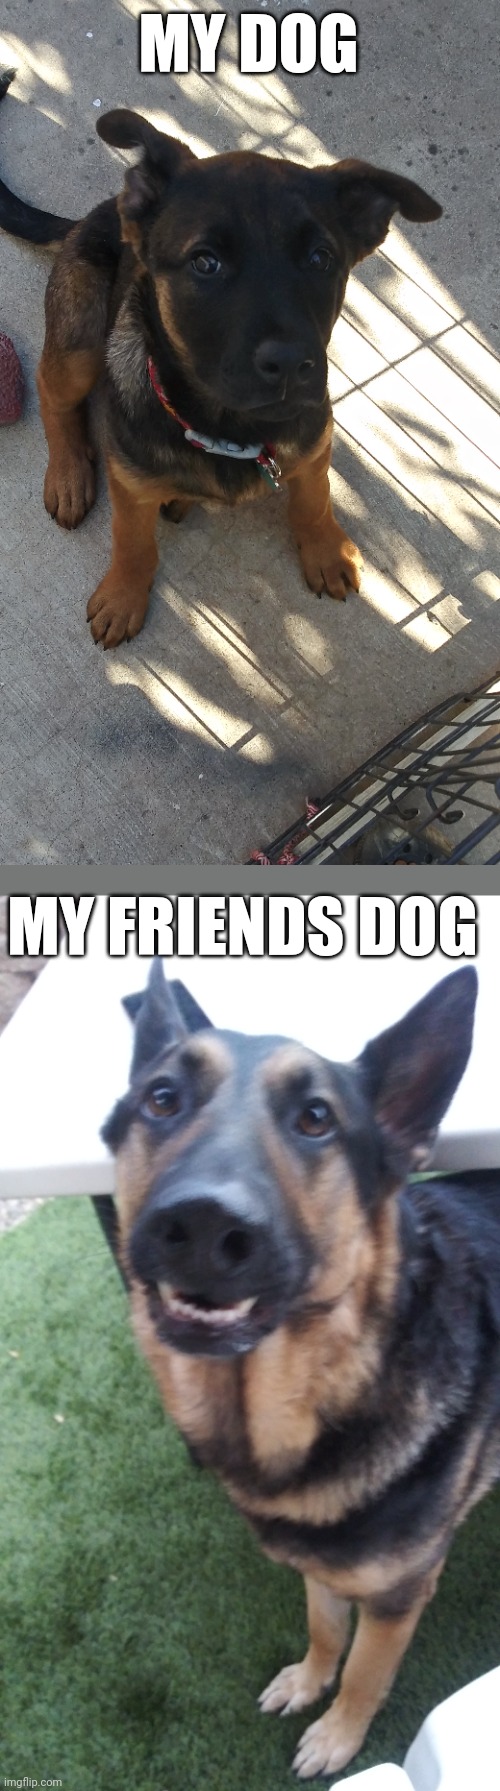 Puppy dog | MY DOG; MY FRIENDS DOG | image tagged in dogs,cute,photo | made w/ Imgflip meme maker